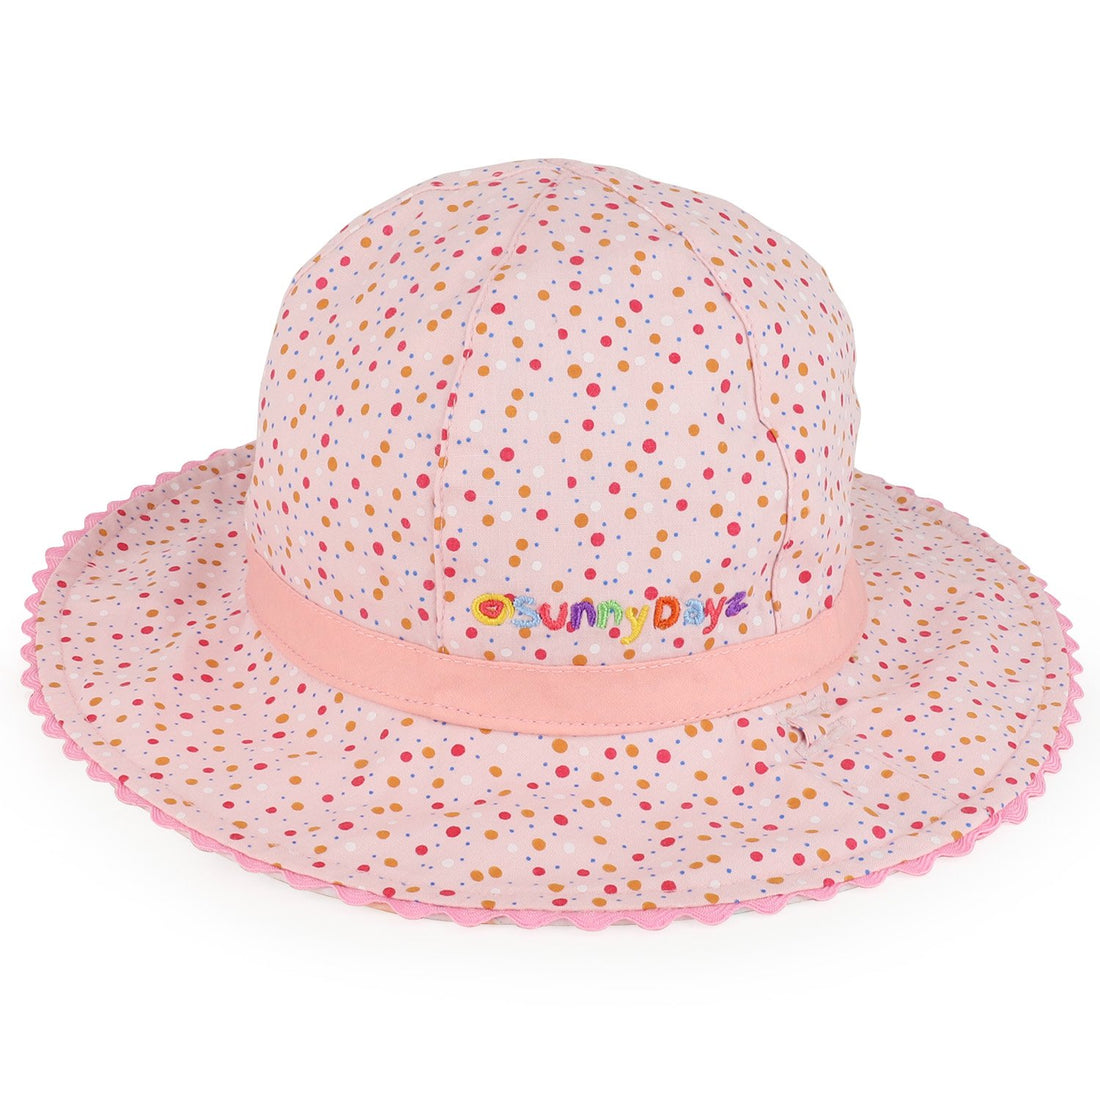 Trendy Apparel Shop Infant Girl's Butterfly and Polka Dots Reversible UPF Sun Floppy Hat